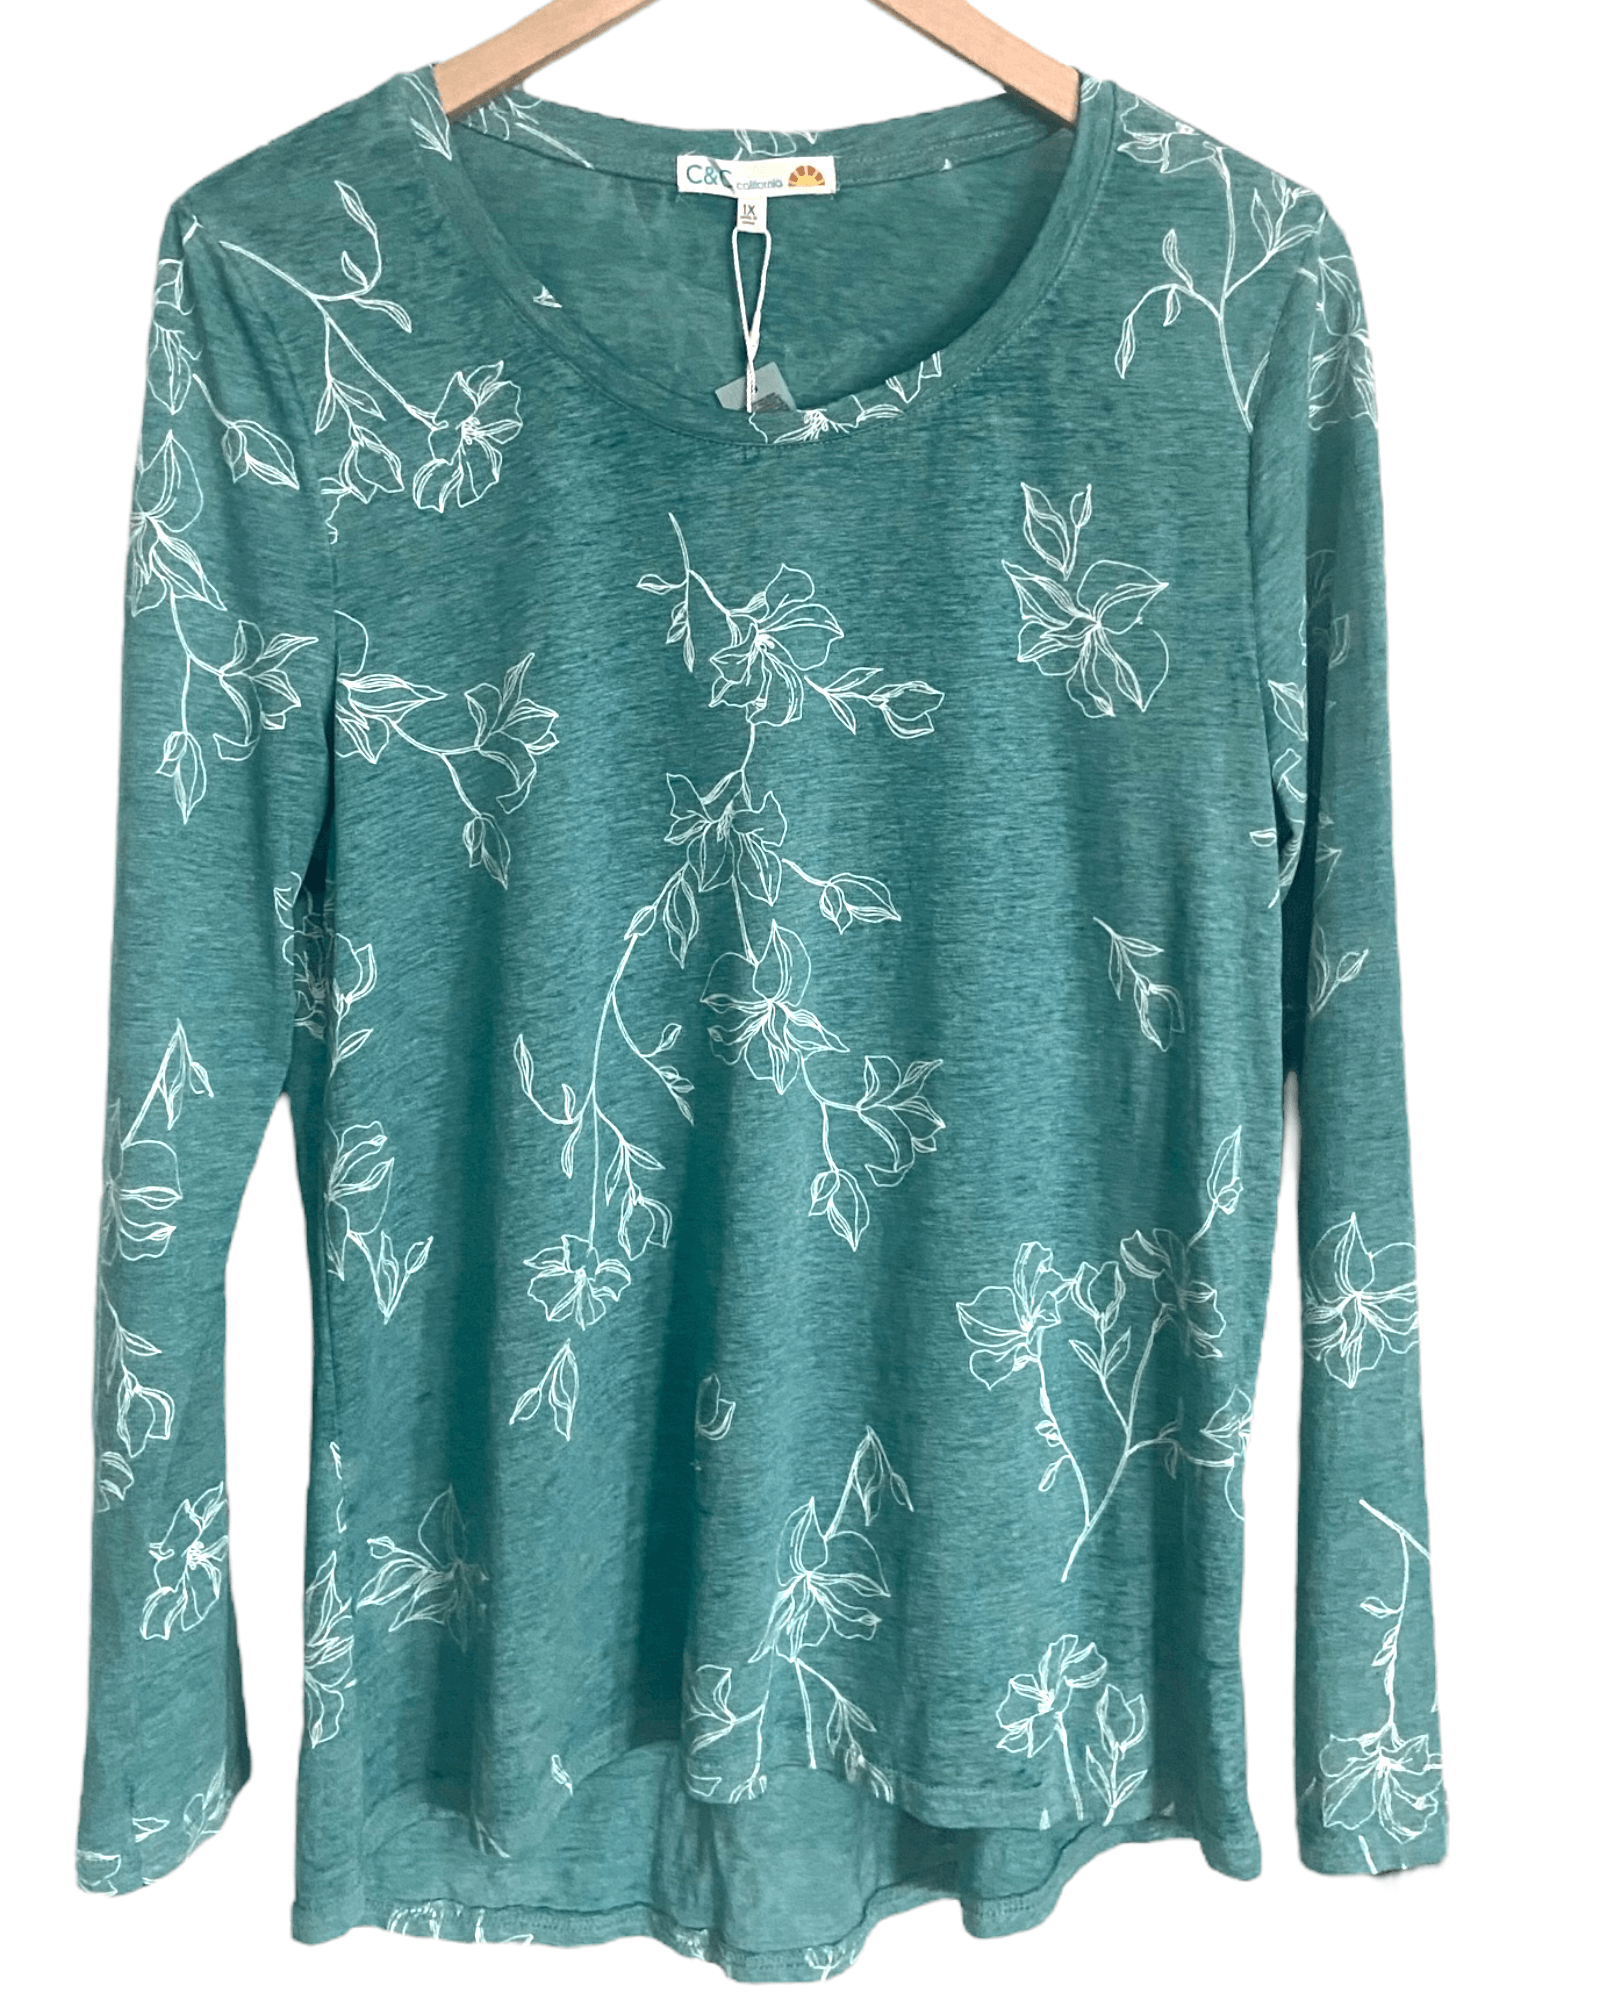 Soft Summer C&C CALIFORNIA arctic floral long sleeved knit tee